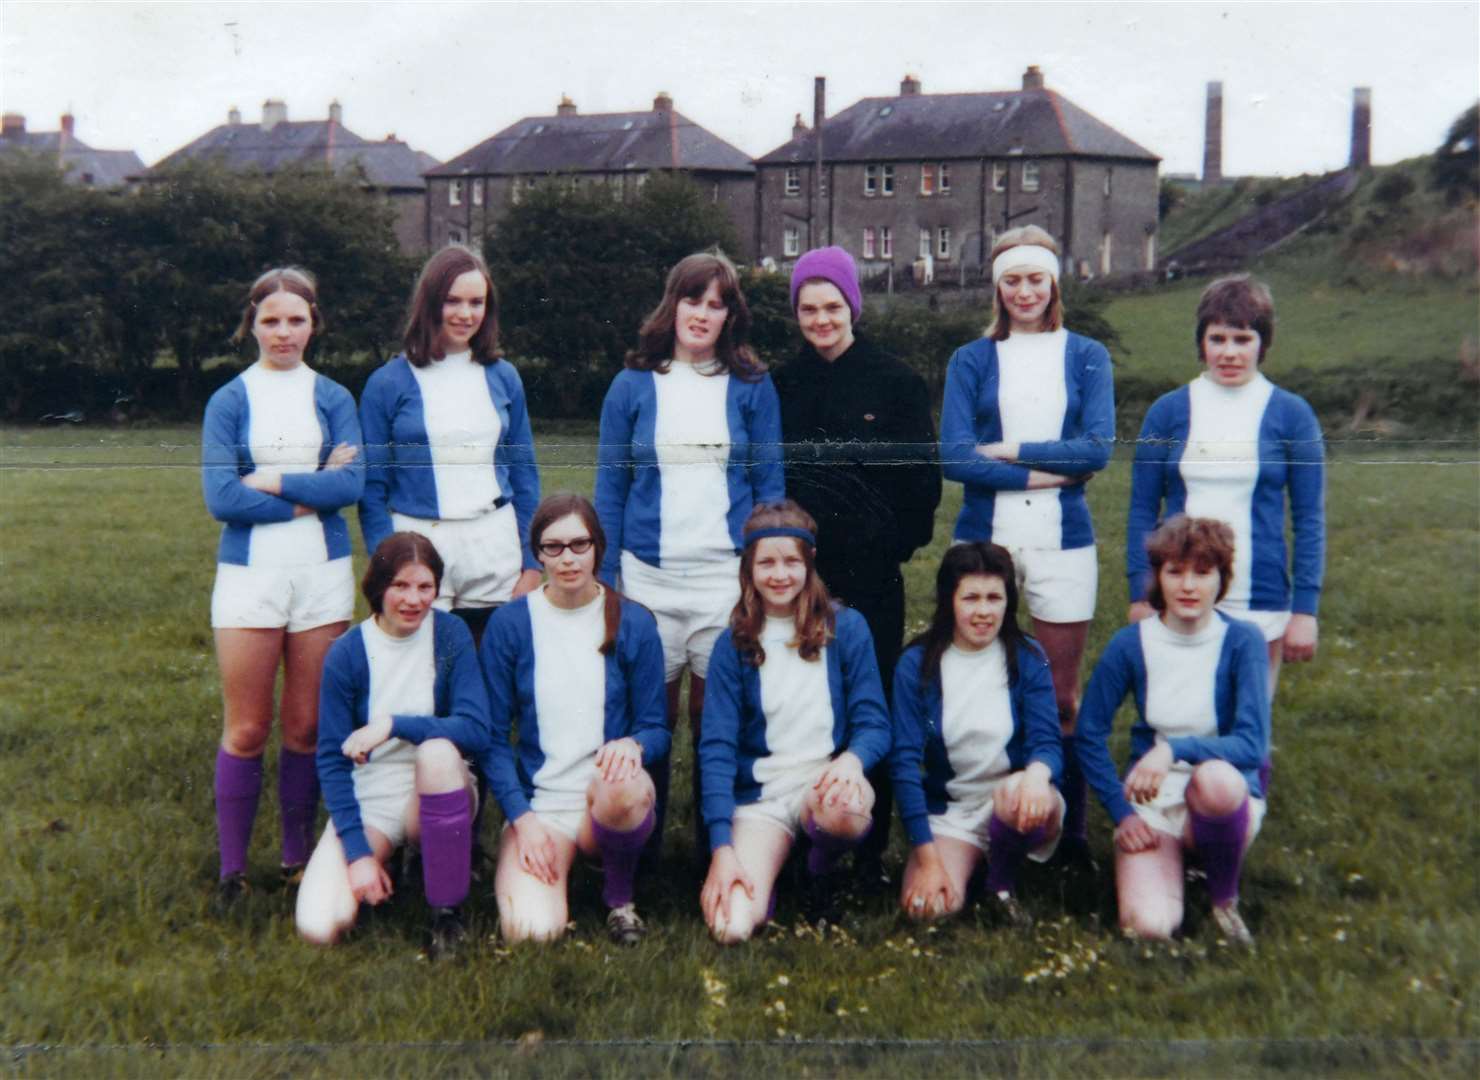 Therese Coffey (front, centre) with Dunfermline Ladies in the early 1970s.